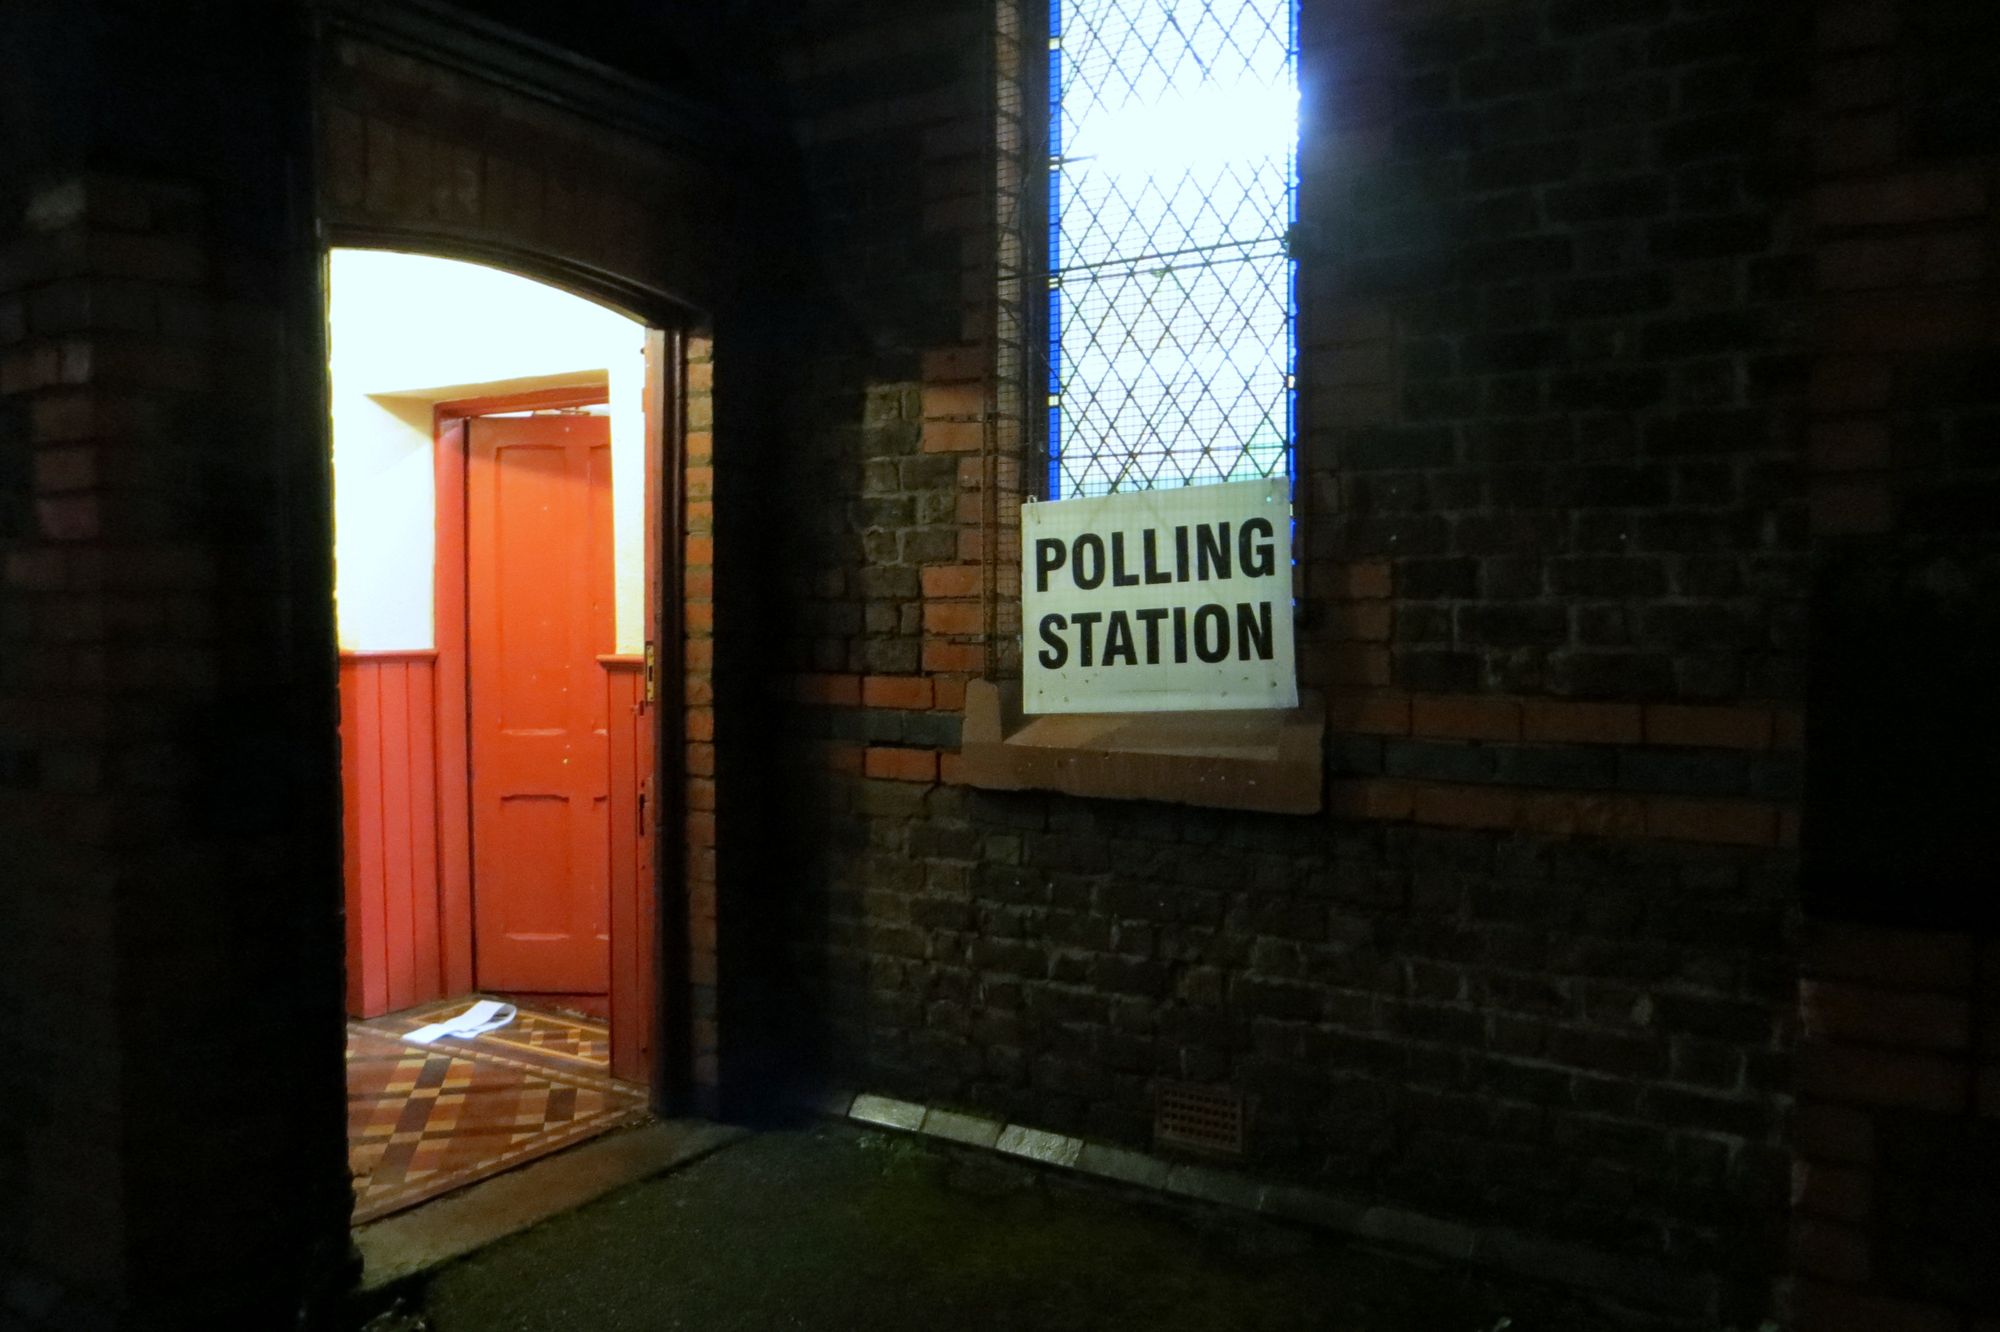 Three questions about the UK's journalism landscape after the General Election result